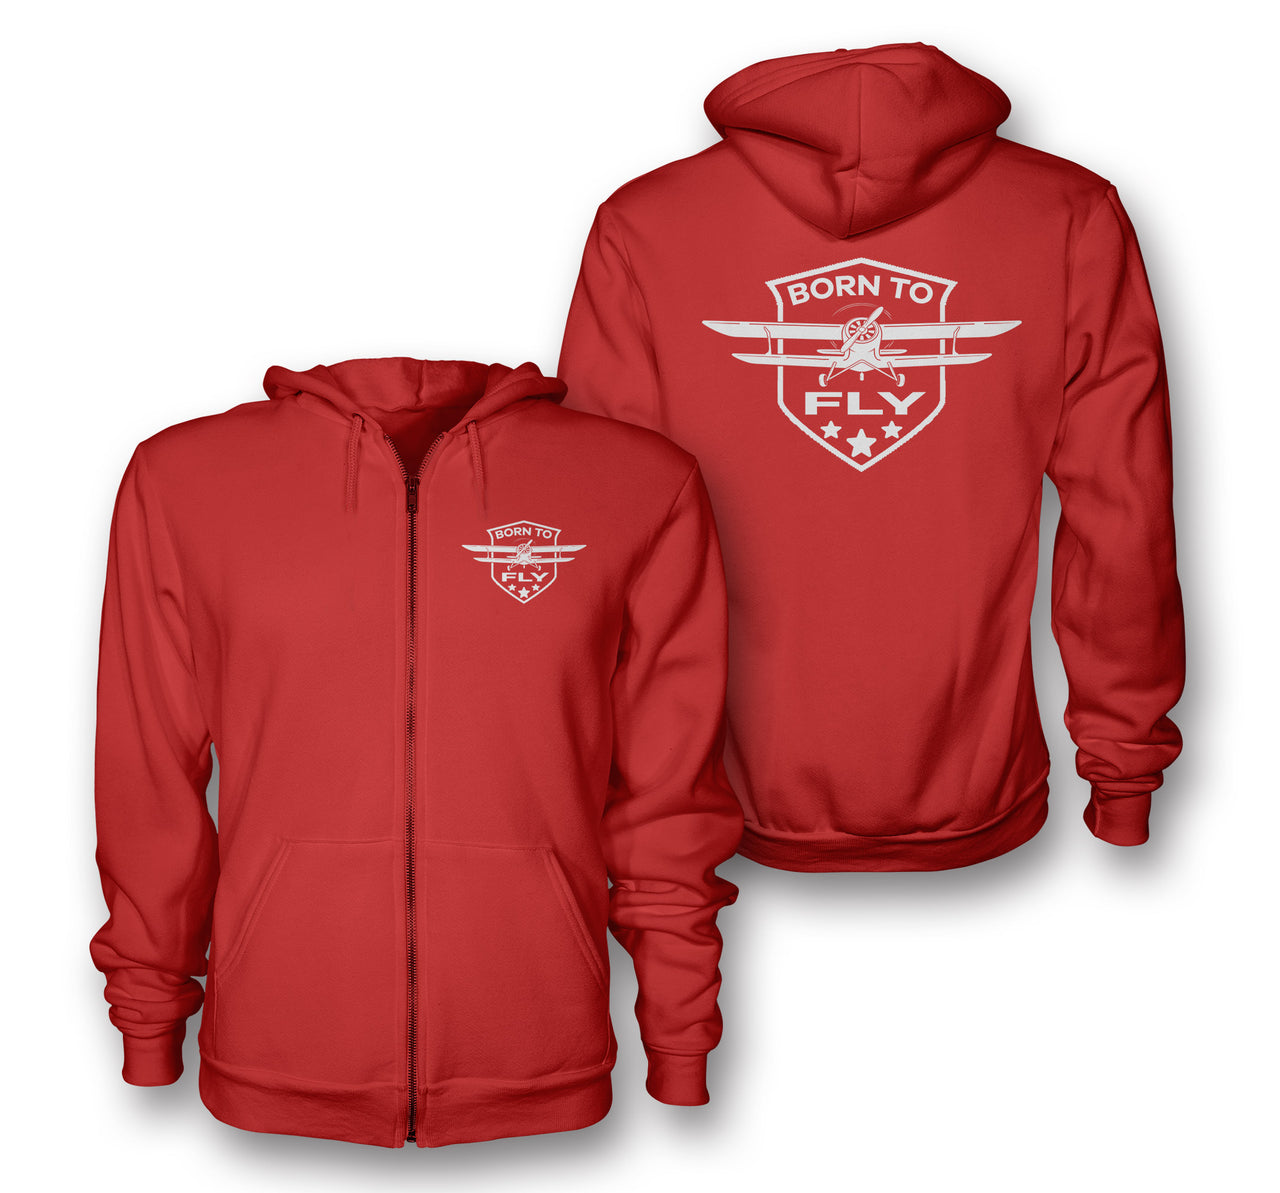 Super Born To Fly Designed Zipped Hoodies